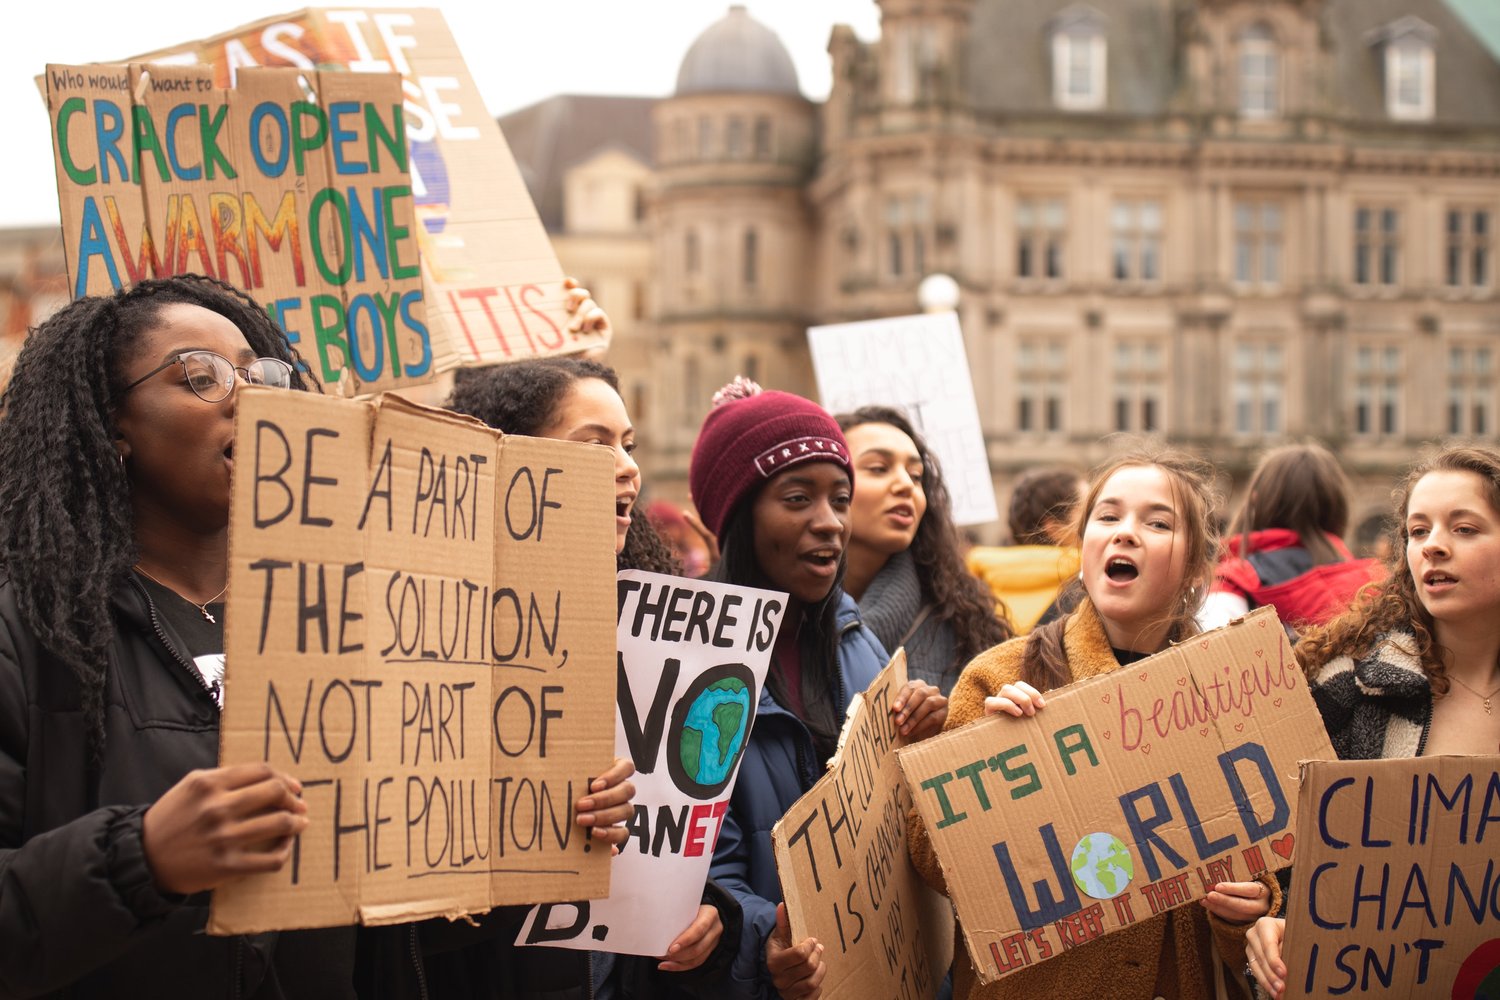 group of young people protesting with signs